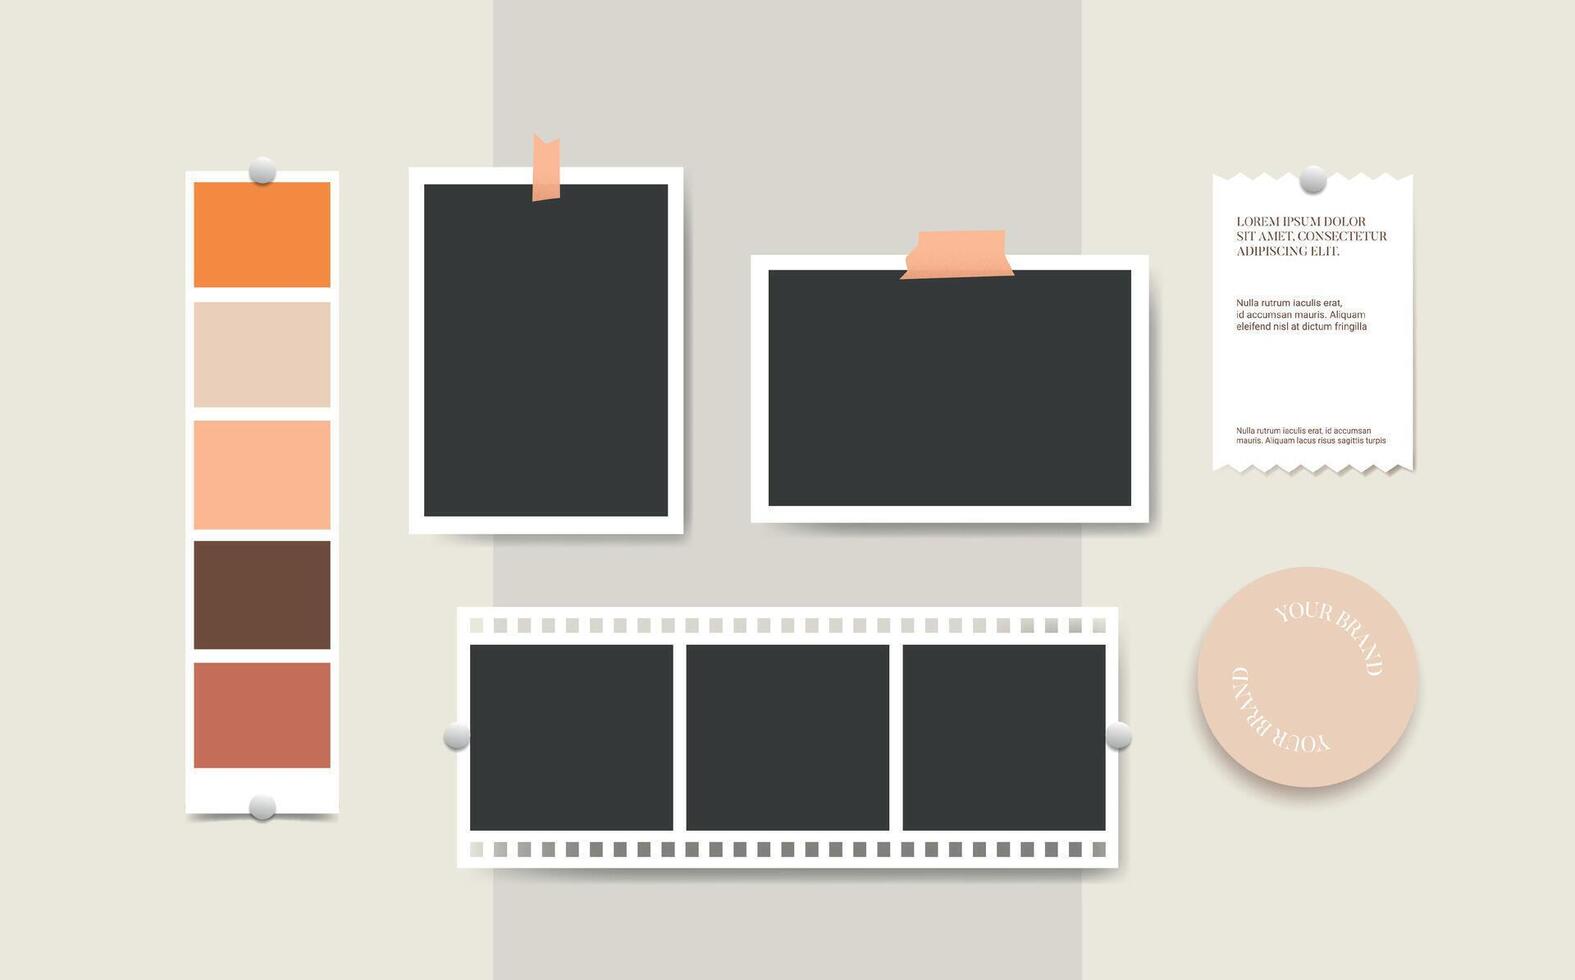 Moodboard creative template collage vector